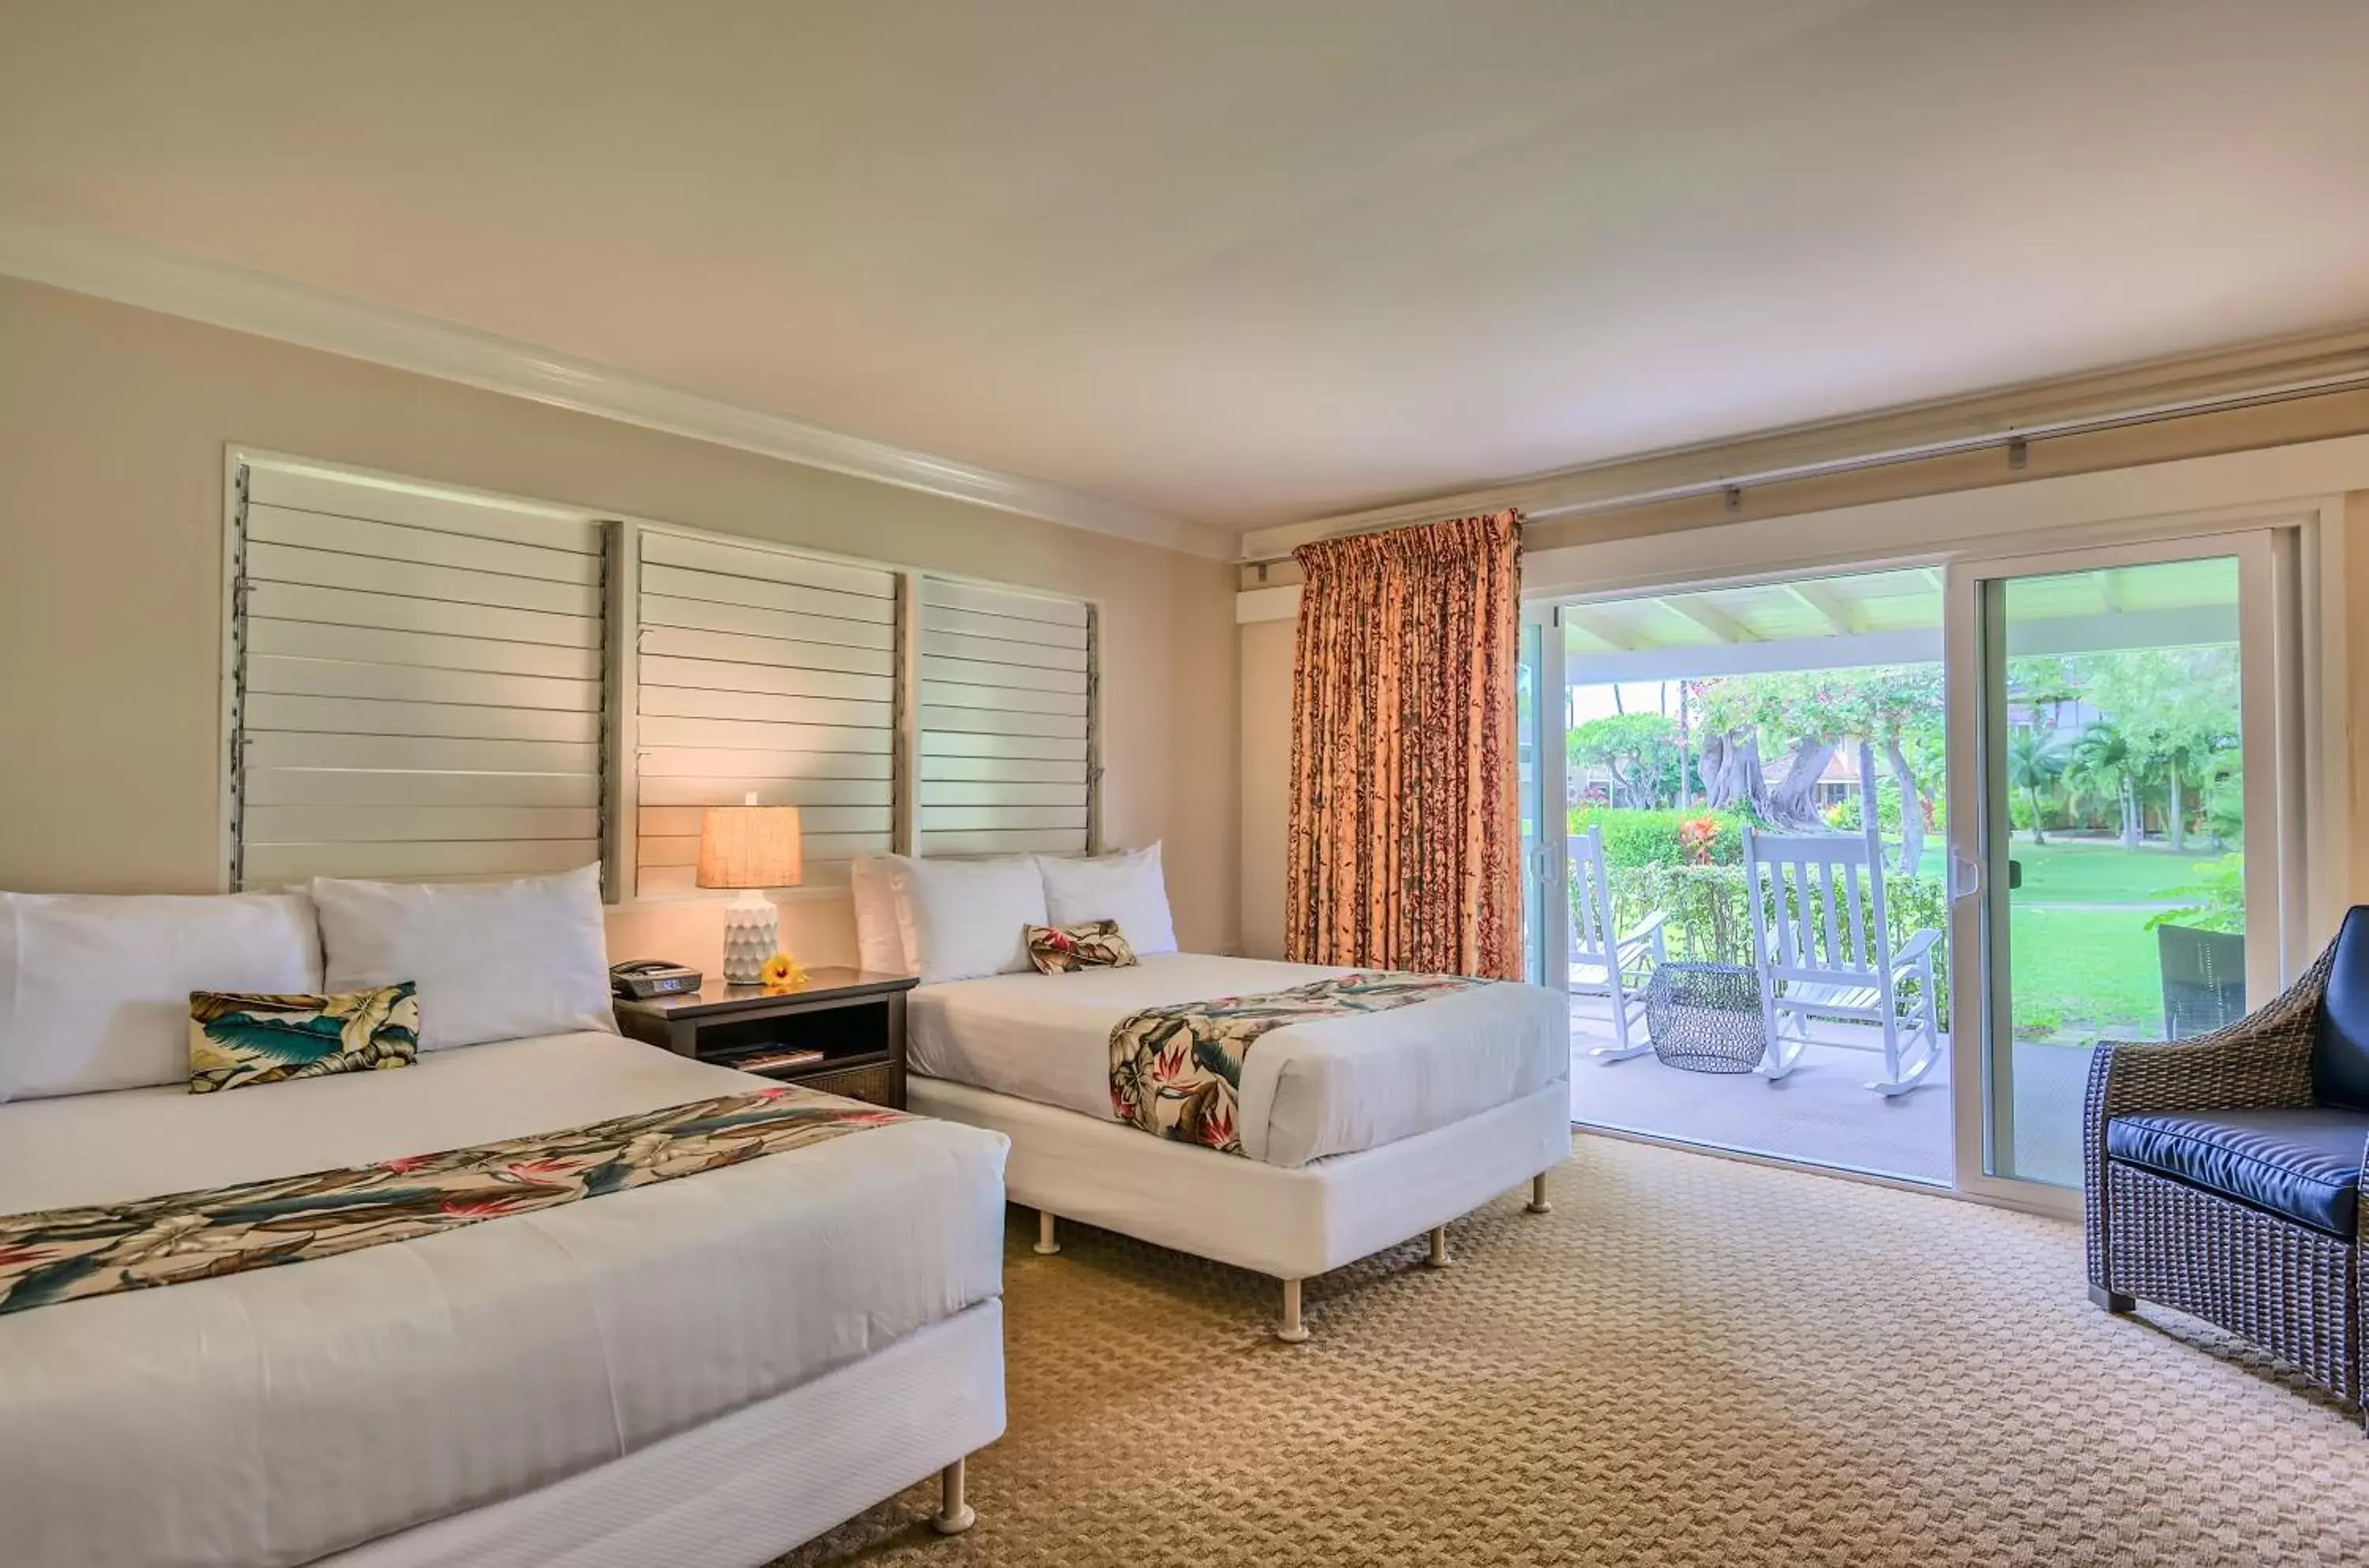 Garden Bungalow Room Doubles in Royal Lahaina Resort & Bungalows